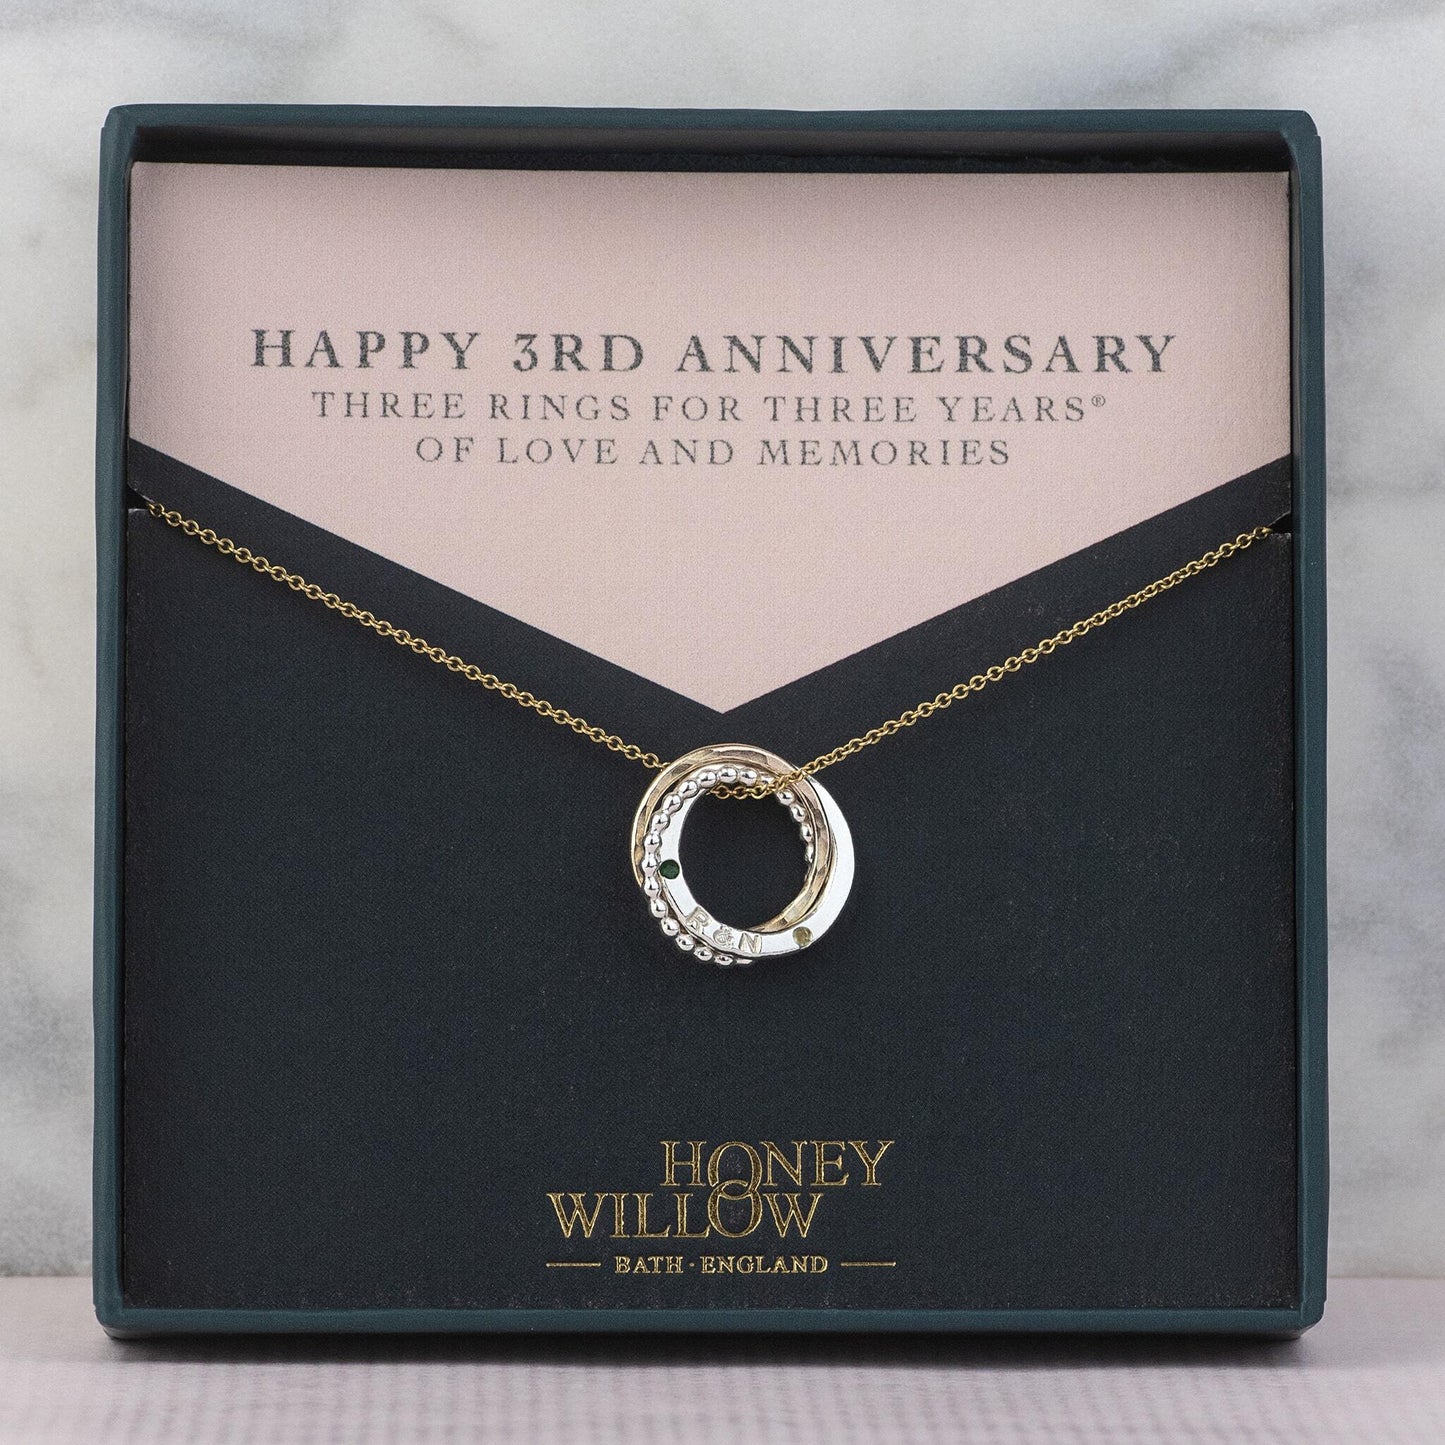 Personalised 3rd Anniversary Birthstone Necklace - The Original 3 Rings for 3 Years Necklace - Petite Silver & Gold